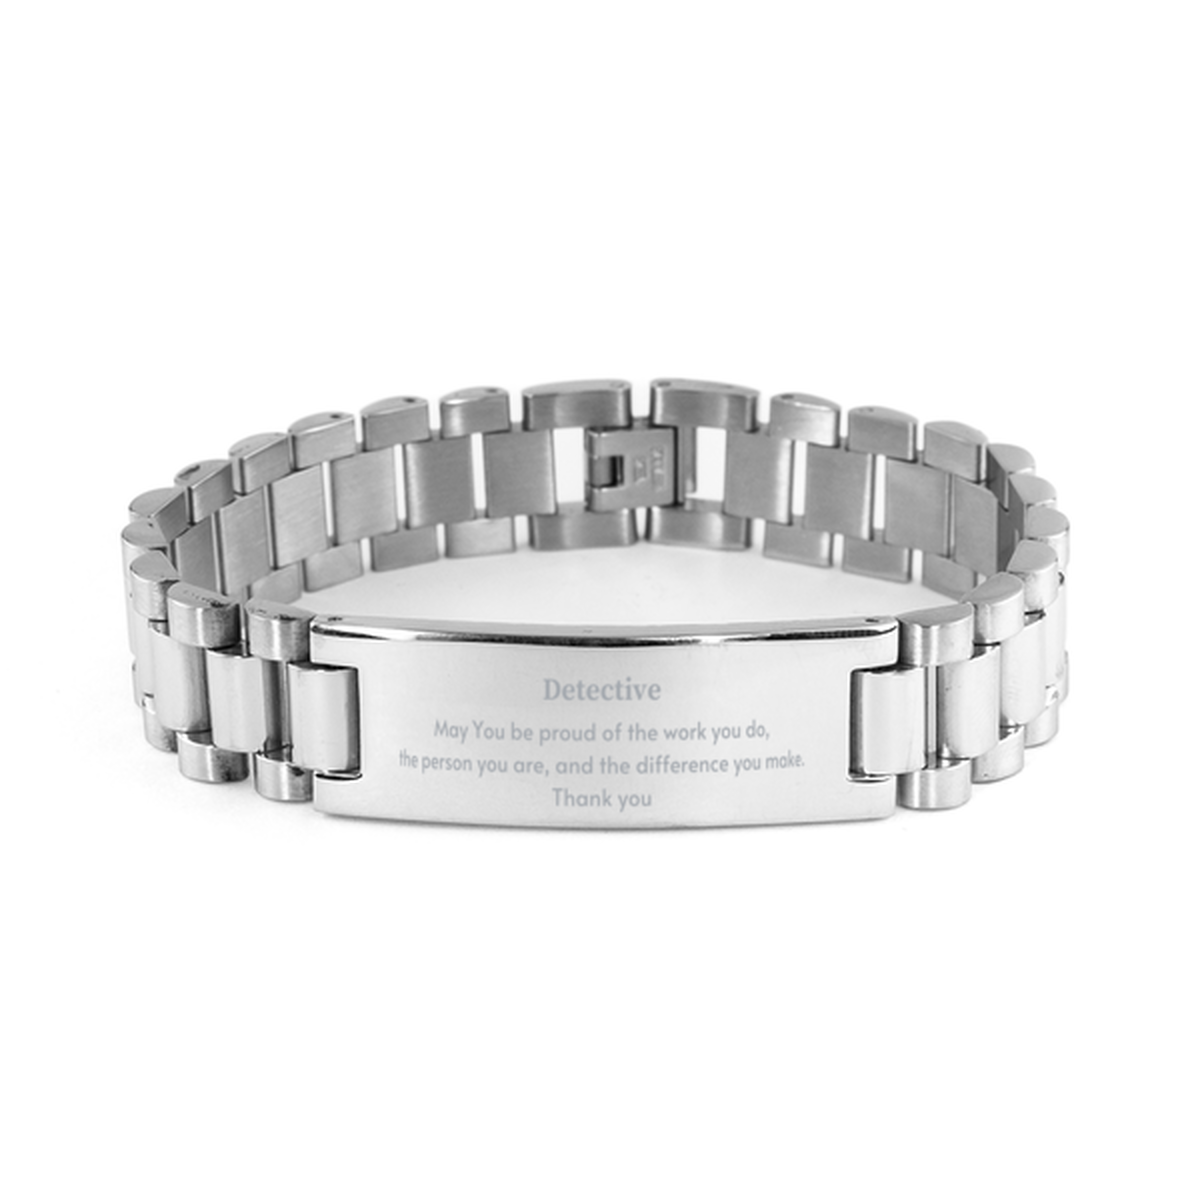 Heartwarming Ladder Stainless Steel Bracelet Retirement Coworkers Gifts for Detective, Detective May You be proud of the work you do, the person you are Gifts for Boss Men Women Friends